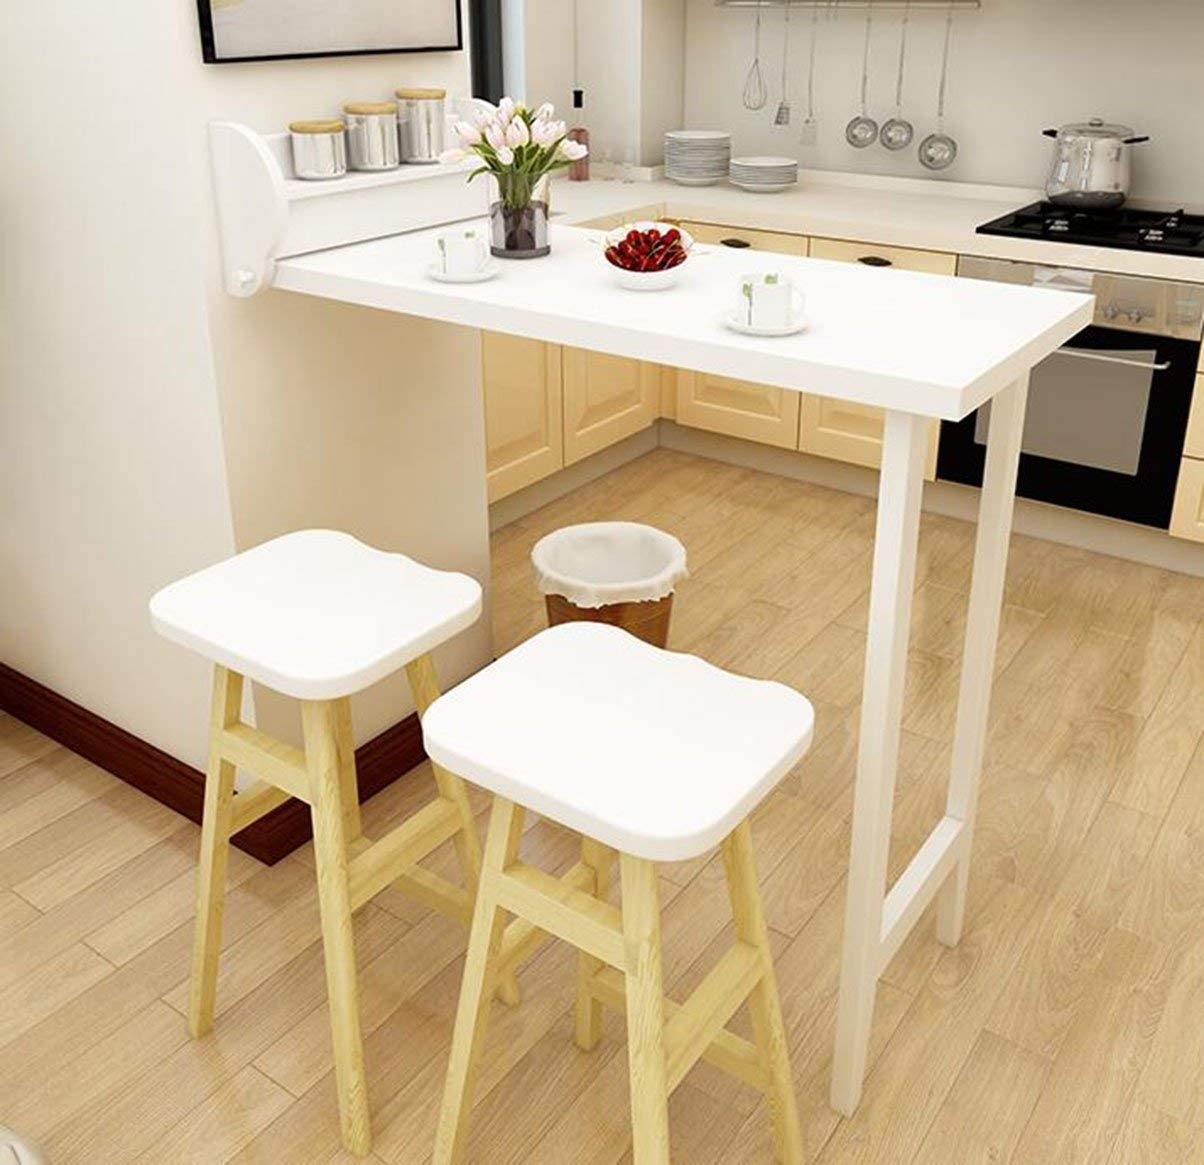 Bar Etc Wall Mounted Fold Down Table,Corner Folding Computer Desk Drop-Leaf Wall Mounted Table for Dining Kitchen Study Laundry Dinner Color:White,Size:120x60x40cm/47x24x16in 